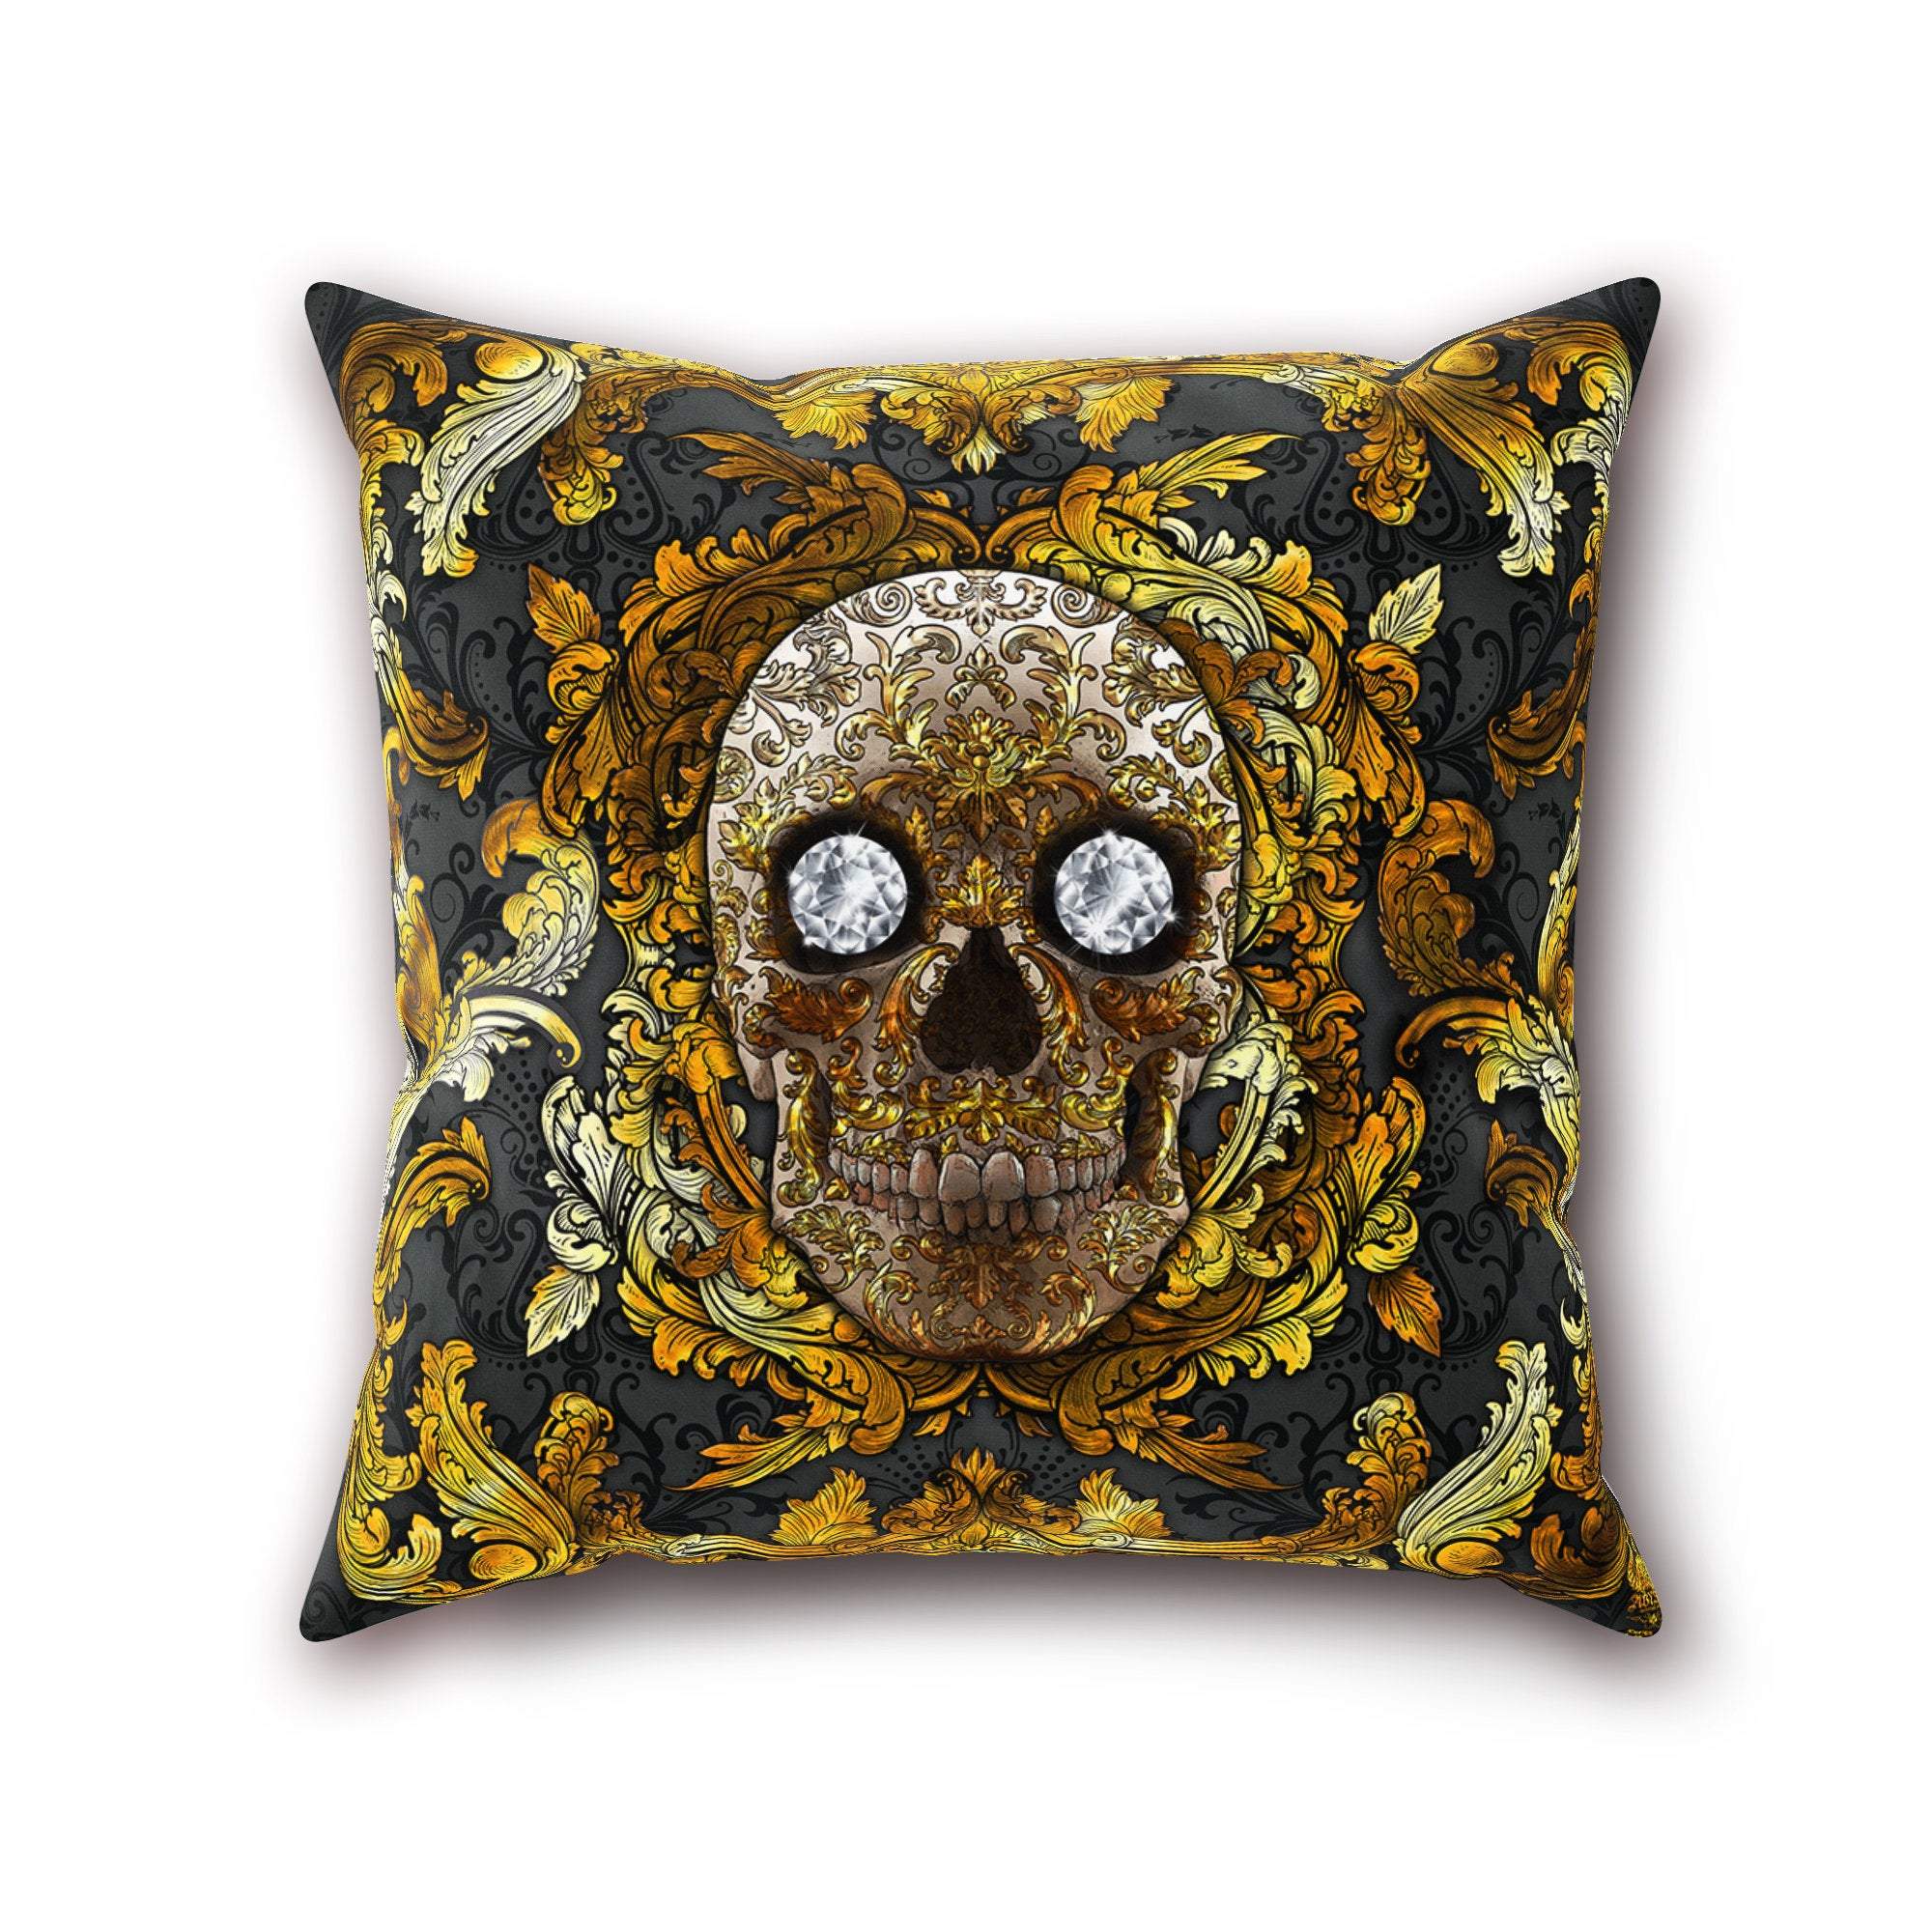 Skull Throw Pillow, Decorative Accent Cushion, Vintage, Baroque Decor, Macabre Art, Alternative Home, Funky and Eclectic - Gold & Diamonds - Abysm Internal